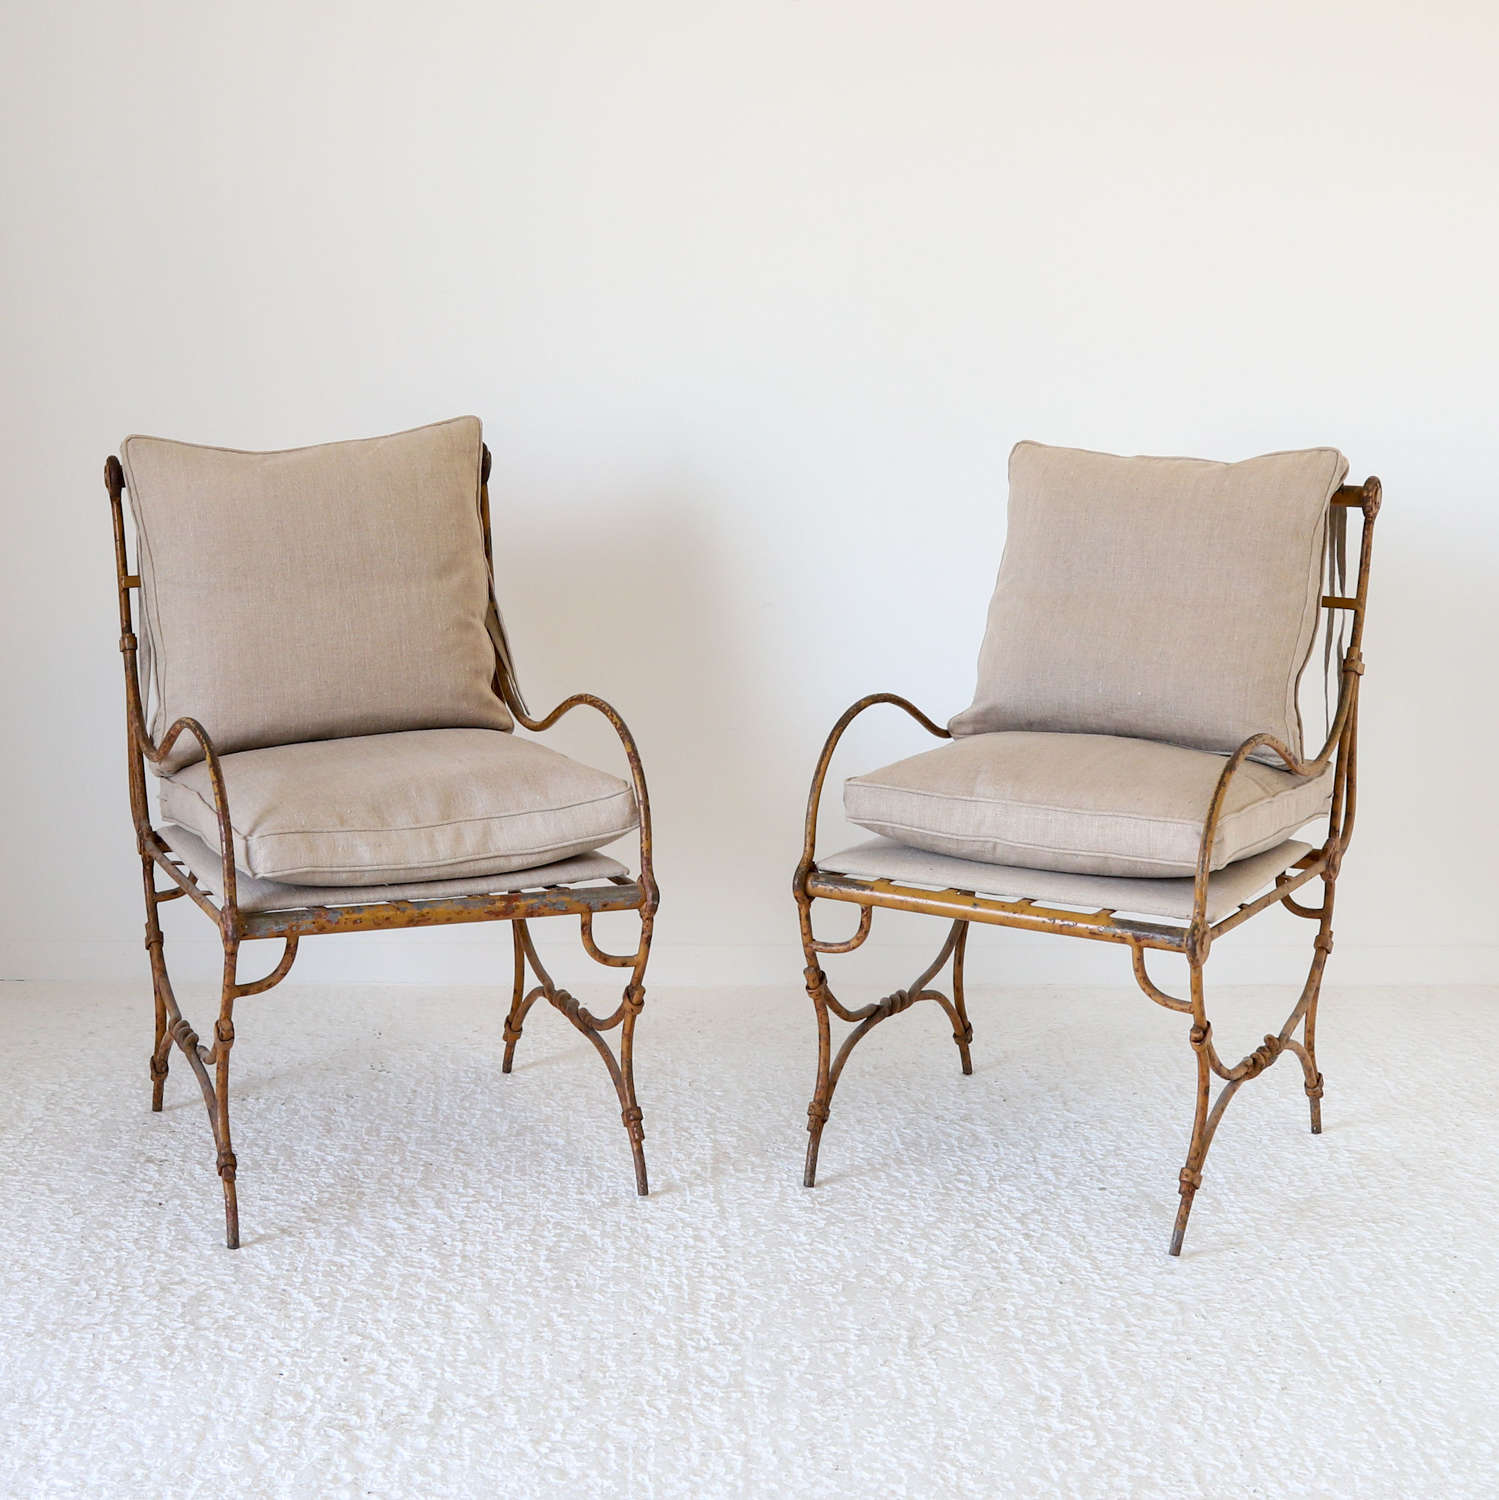 Pair of French early 20th Century Iron Conservatory or garden chairs